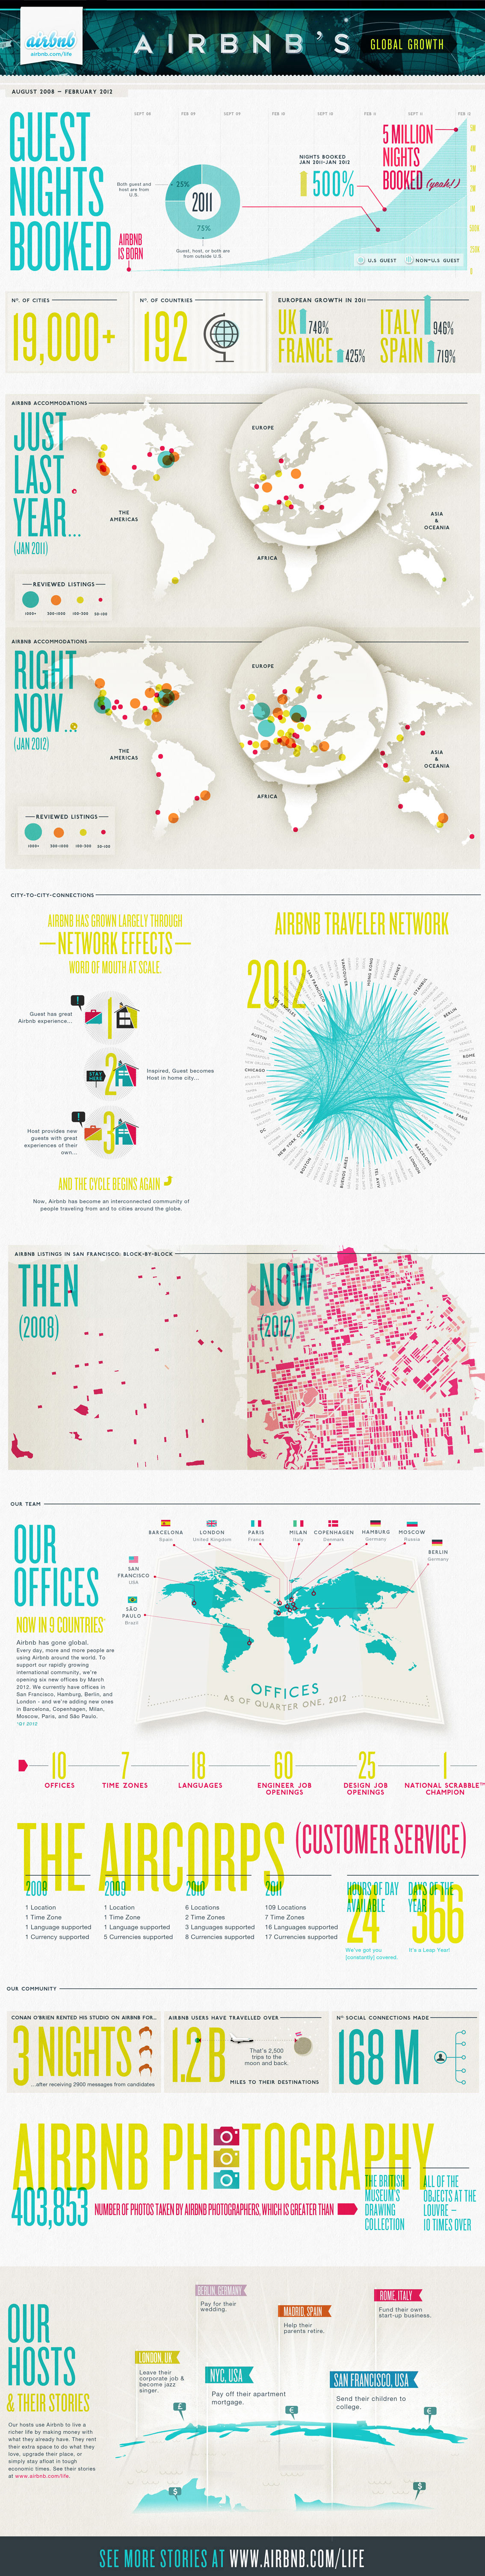 AirBnB Global Growth - Travel Infographic